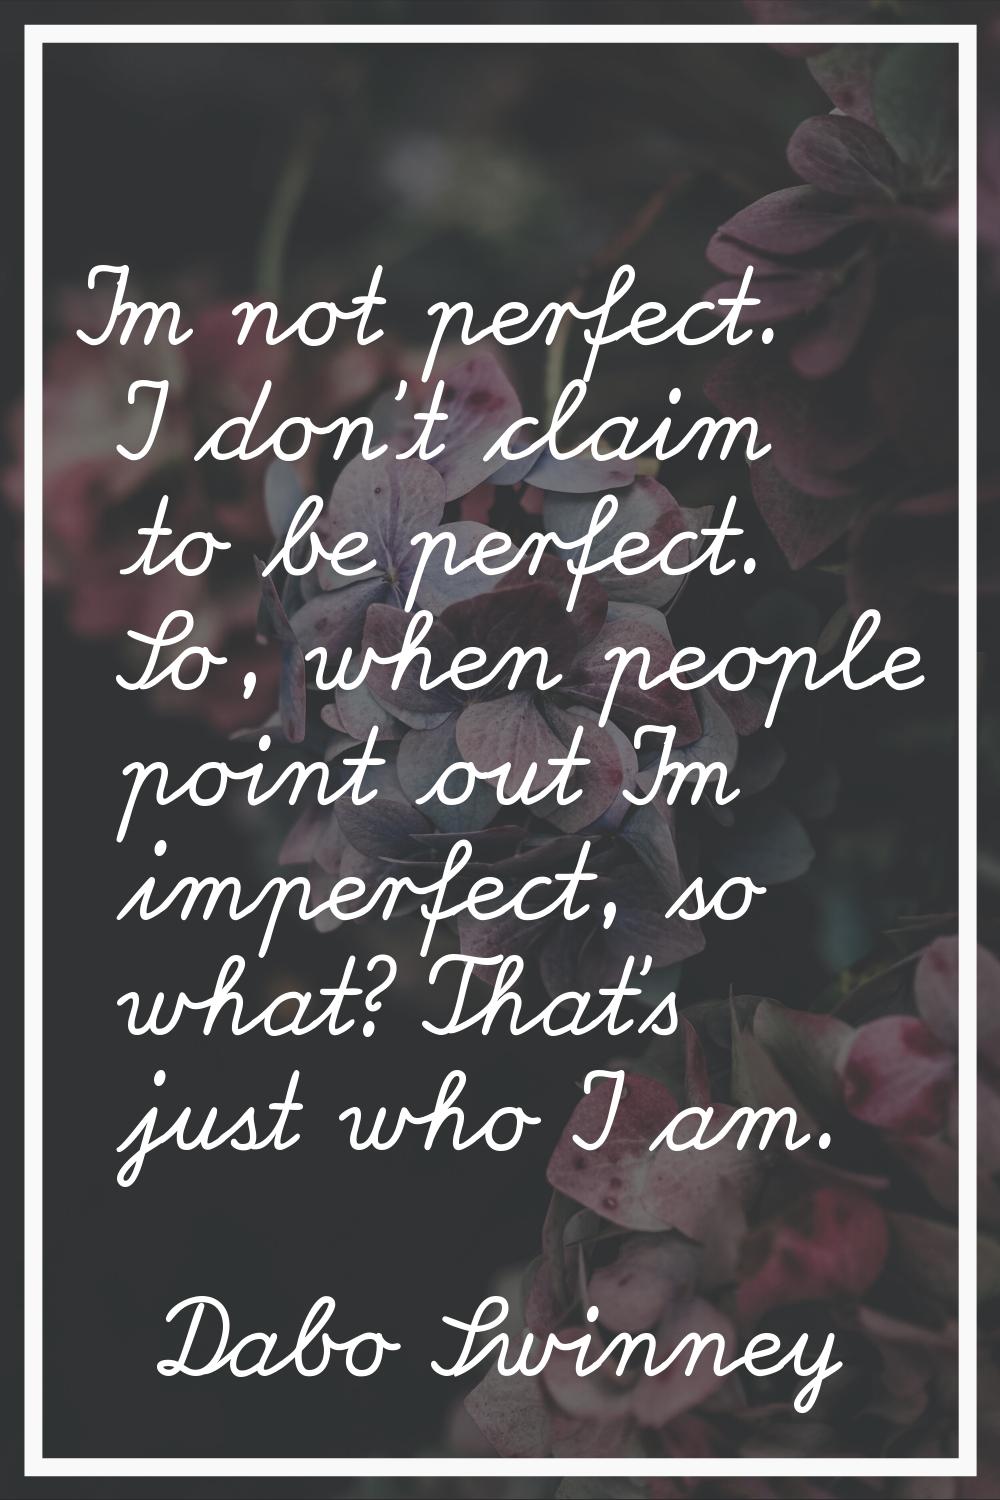 I'm not perfect. I don't claim to be perfect. So, when people point out I'm imperfect, so what? Tha